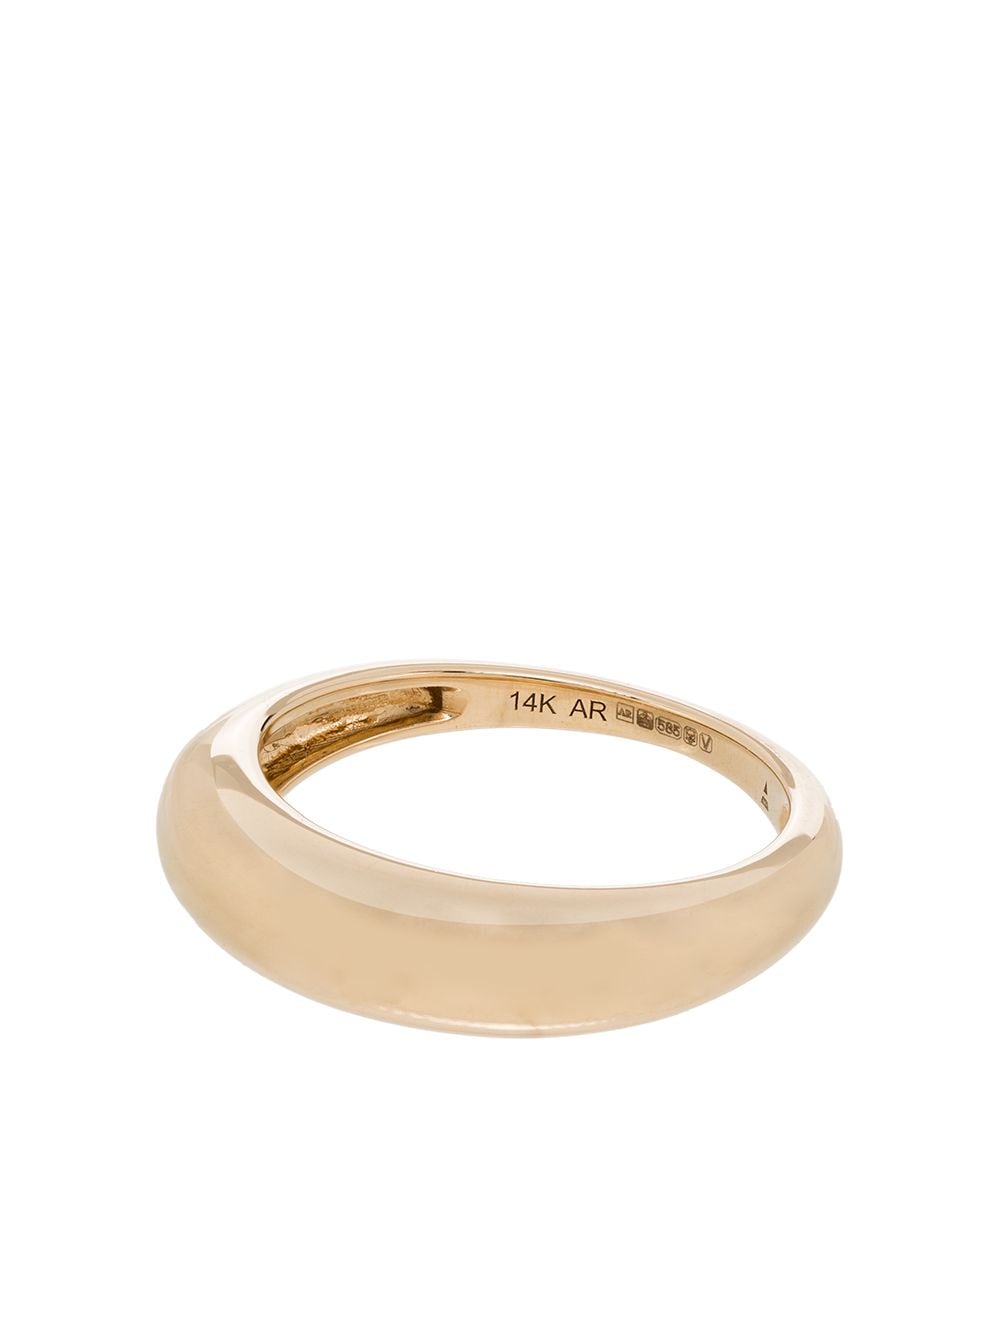 Shop Adina Reyter 14kt Yellow Gold Polished Stackable Ring